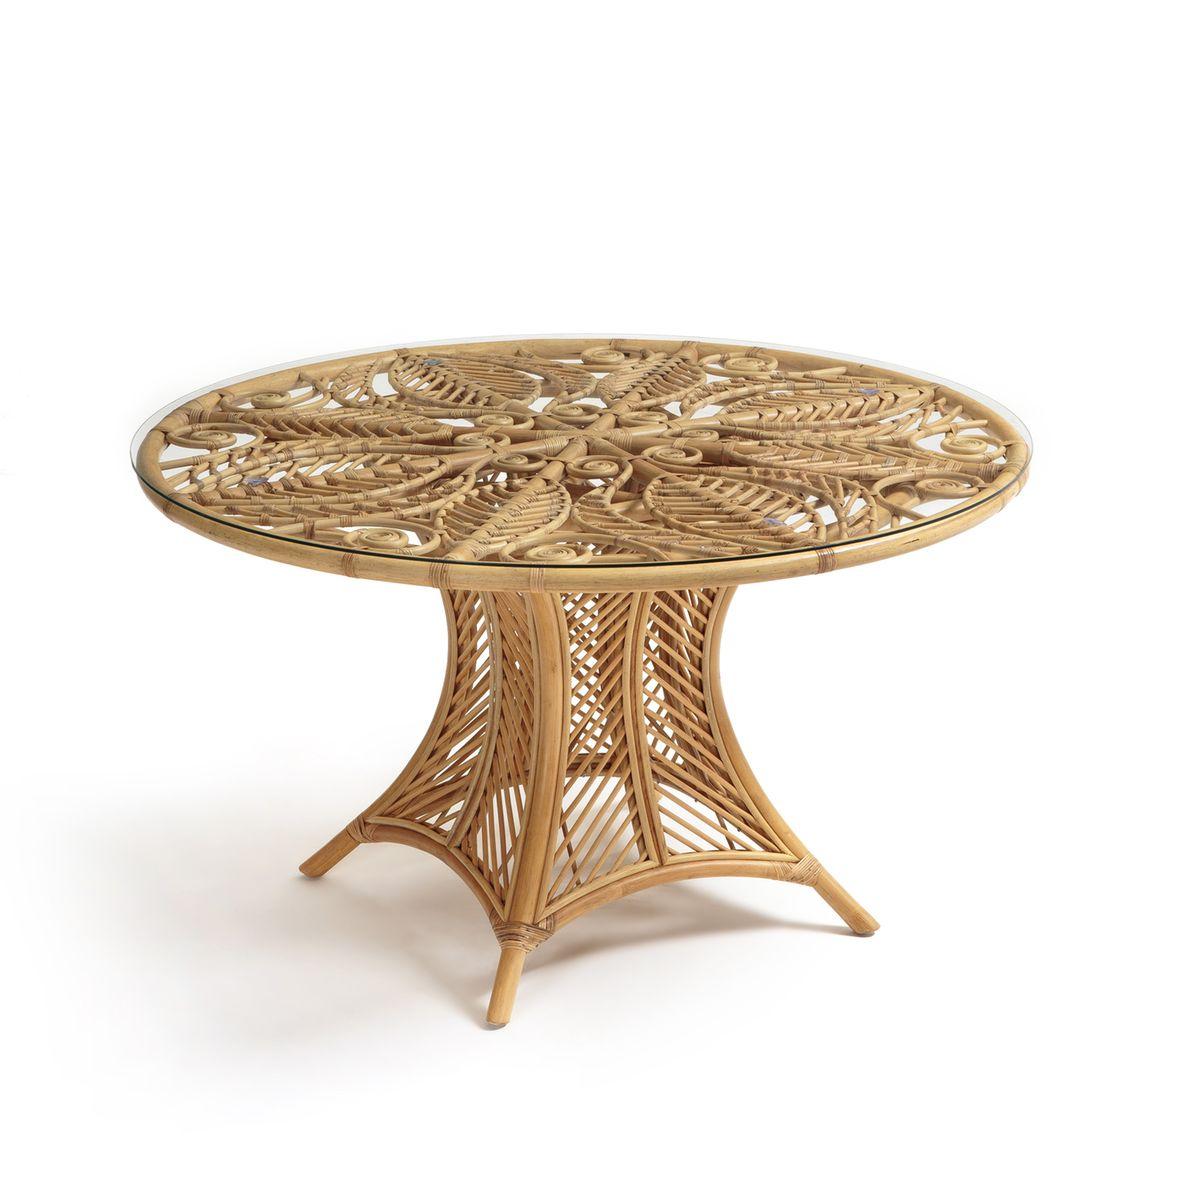 French design and round pedestal dining table composed of a metal structure adorned with hand braided rattan. Elegance and transparency with a round glass tray, aerial and mcm style, in excellent state. (never used).